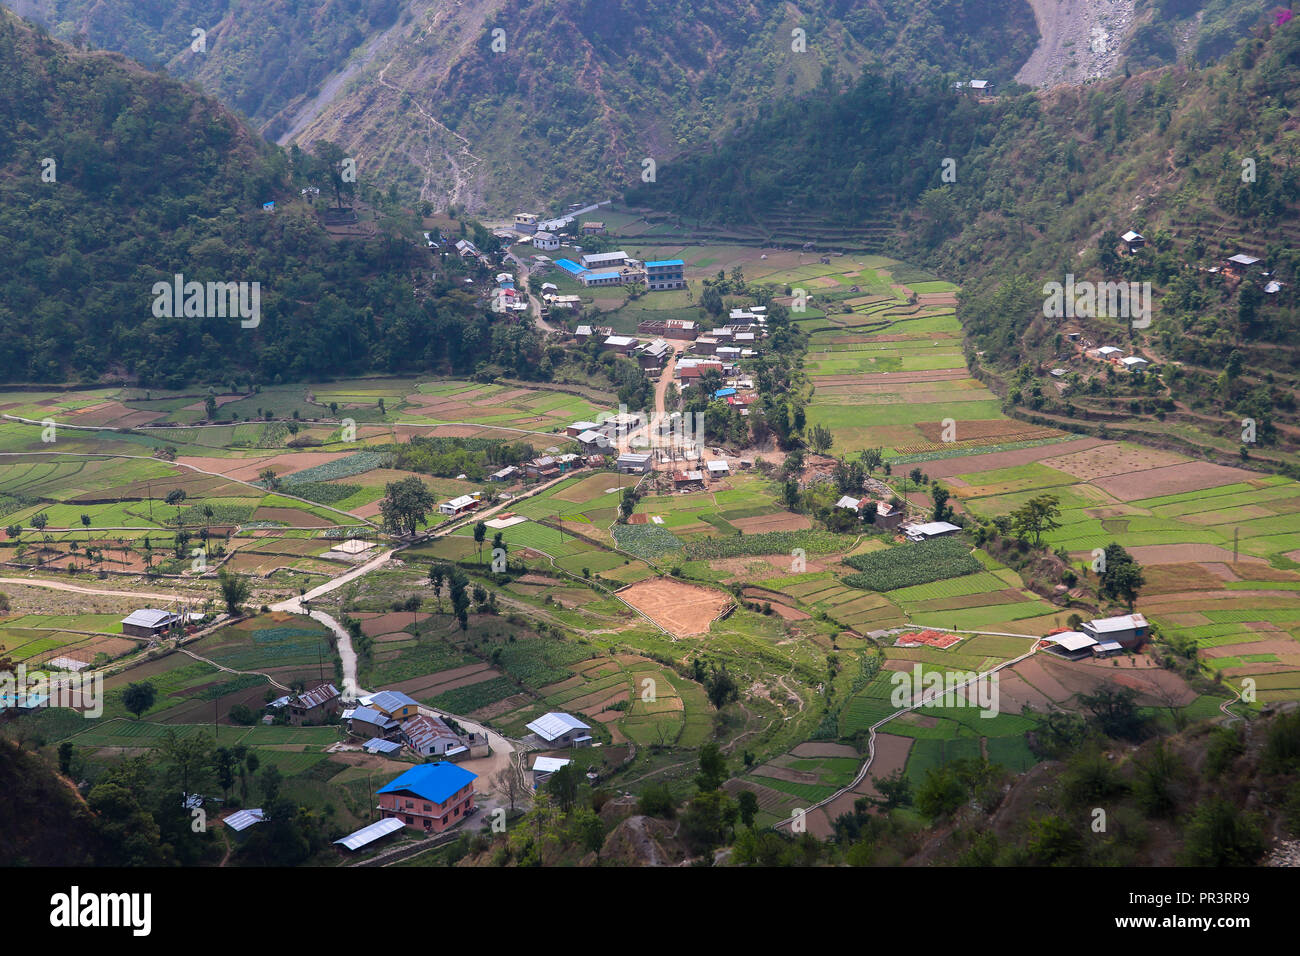 A small remote village surrounded by mountains in a rural area Stock Photo